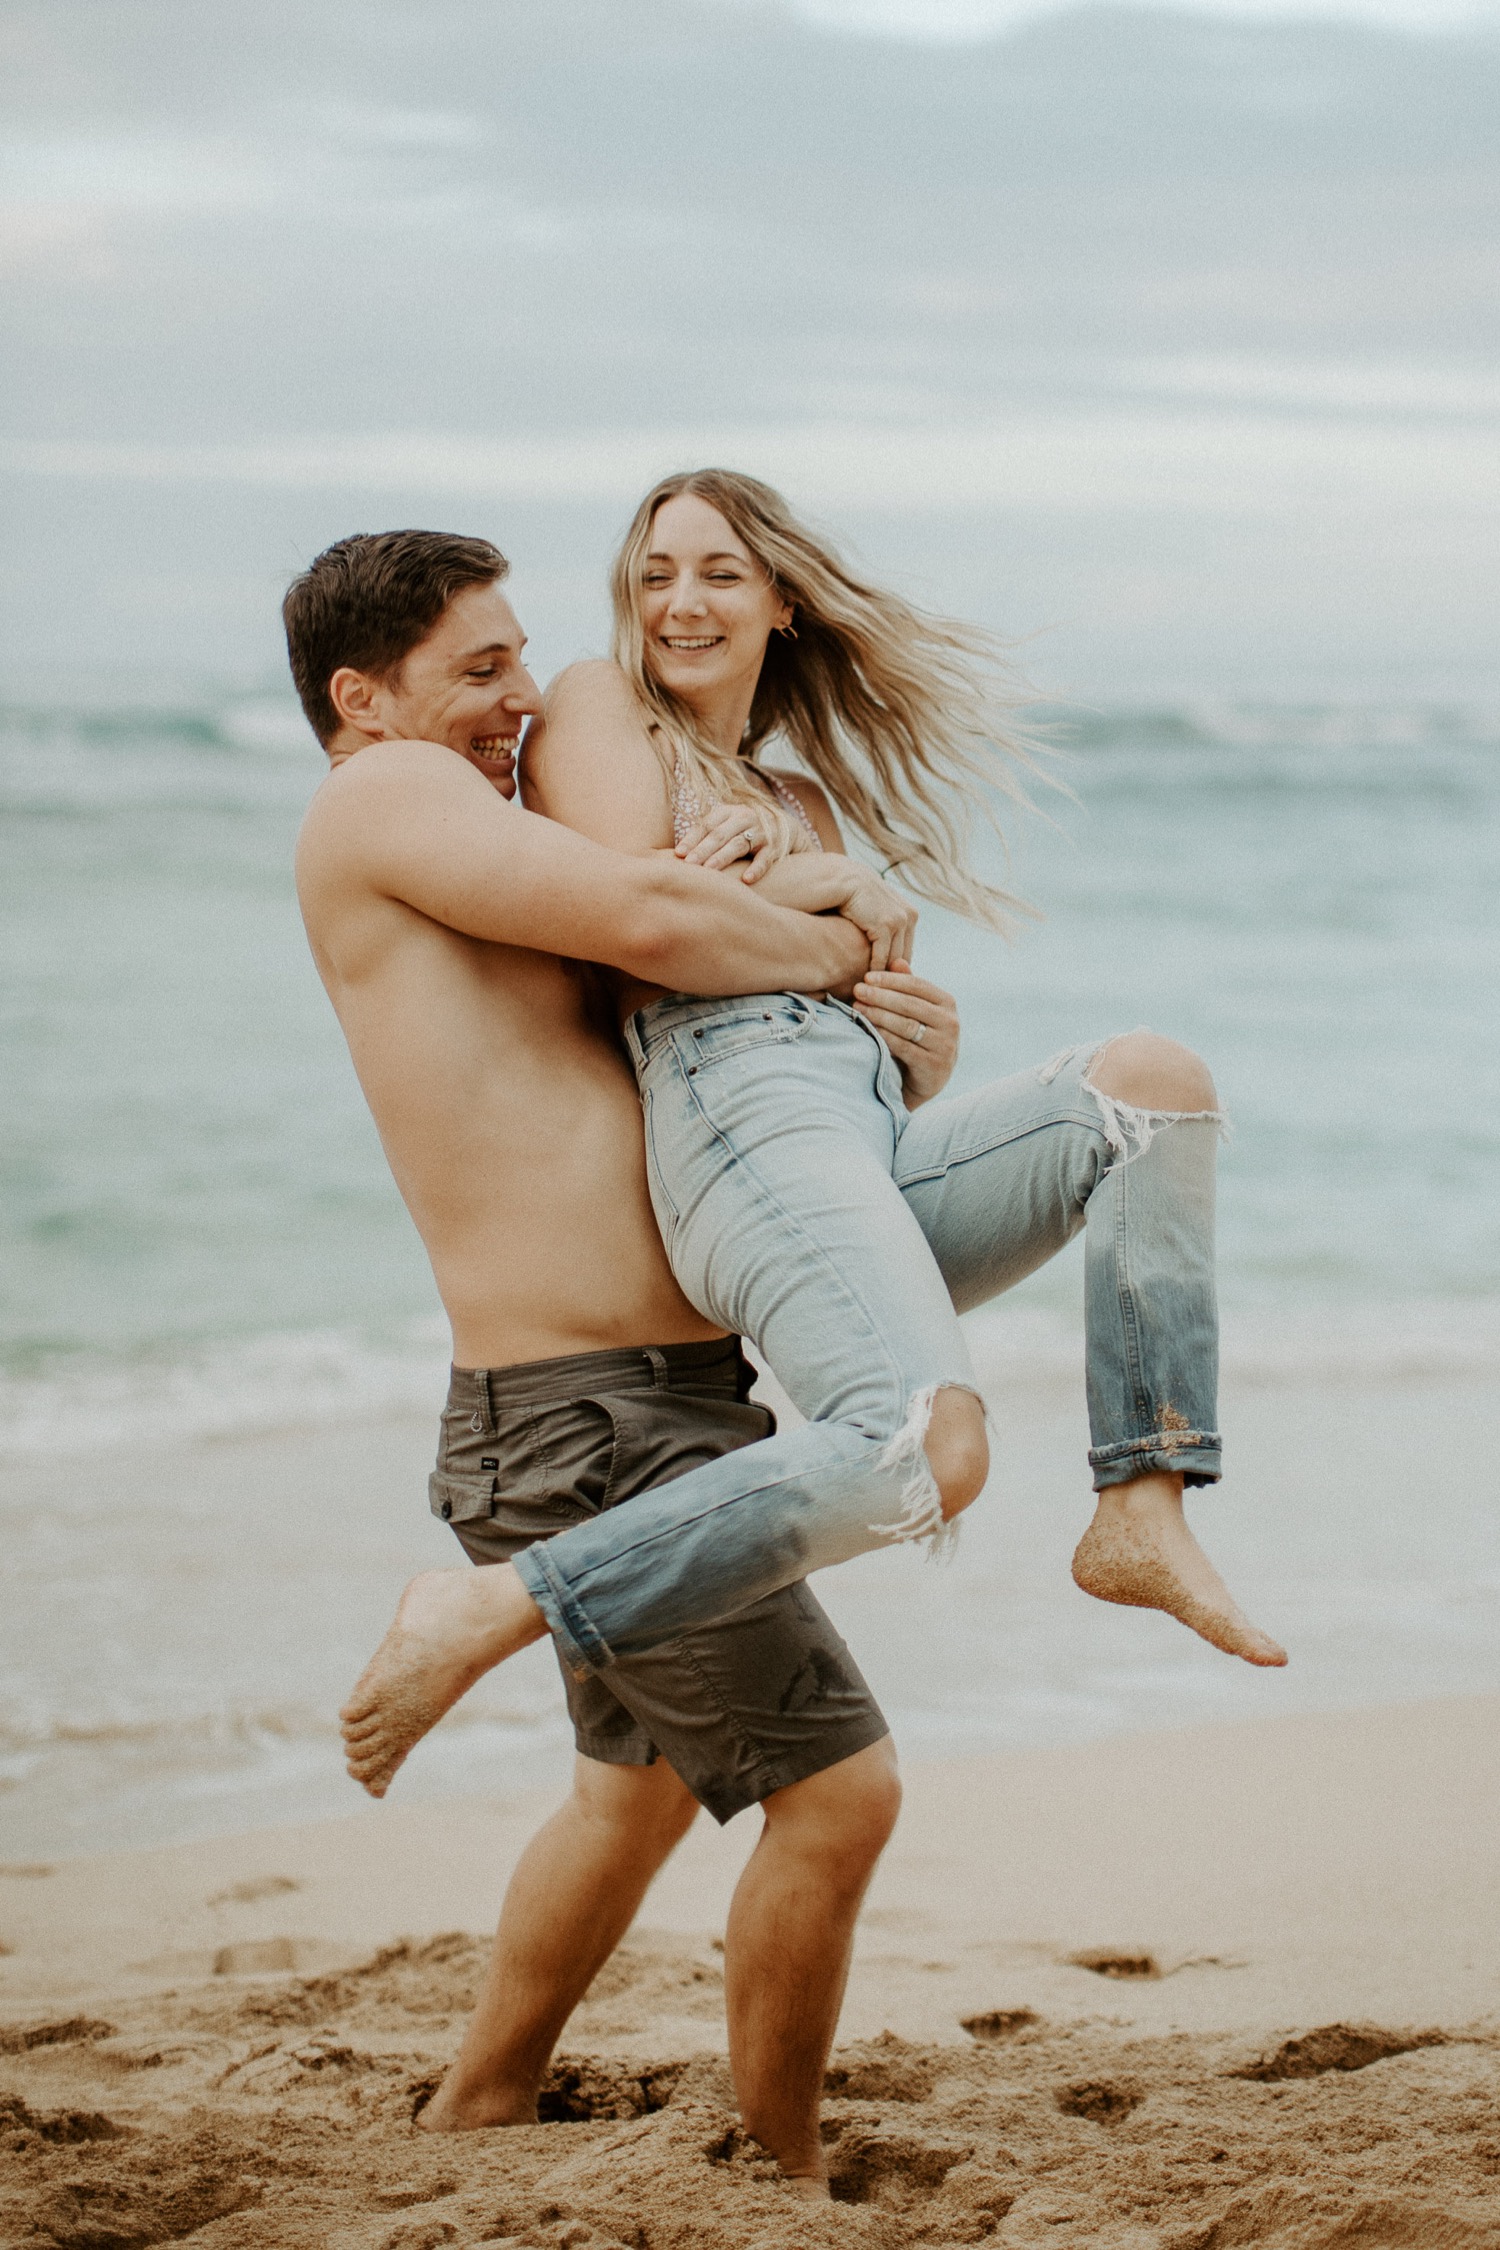 10 Couple Photoshoot Outfit Ideas You'll Love